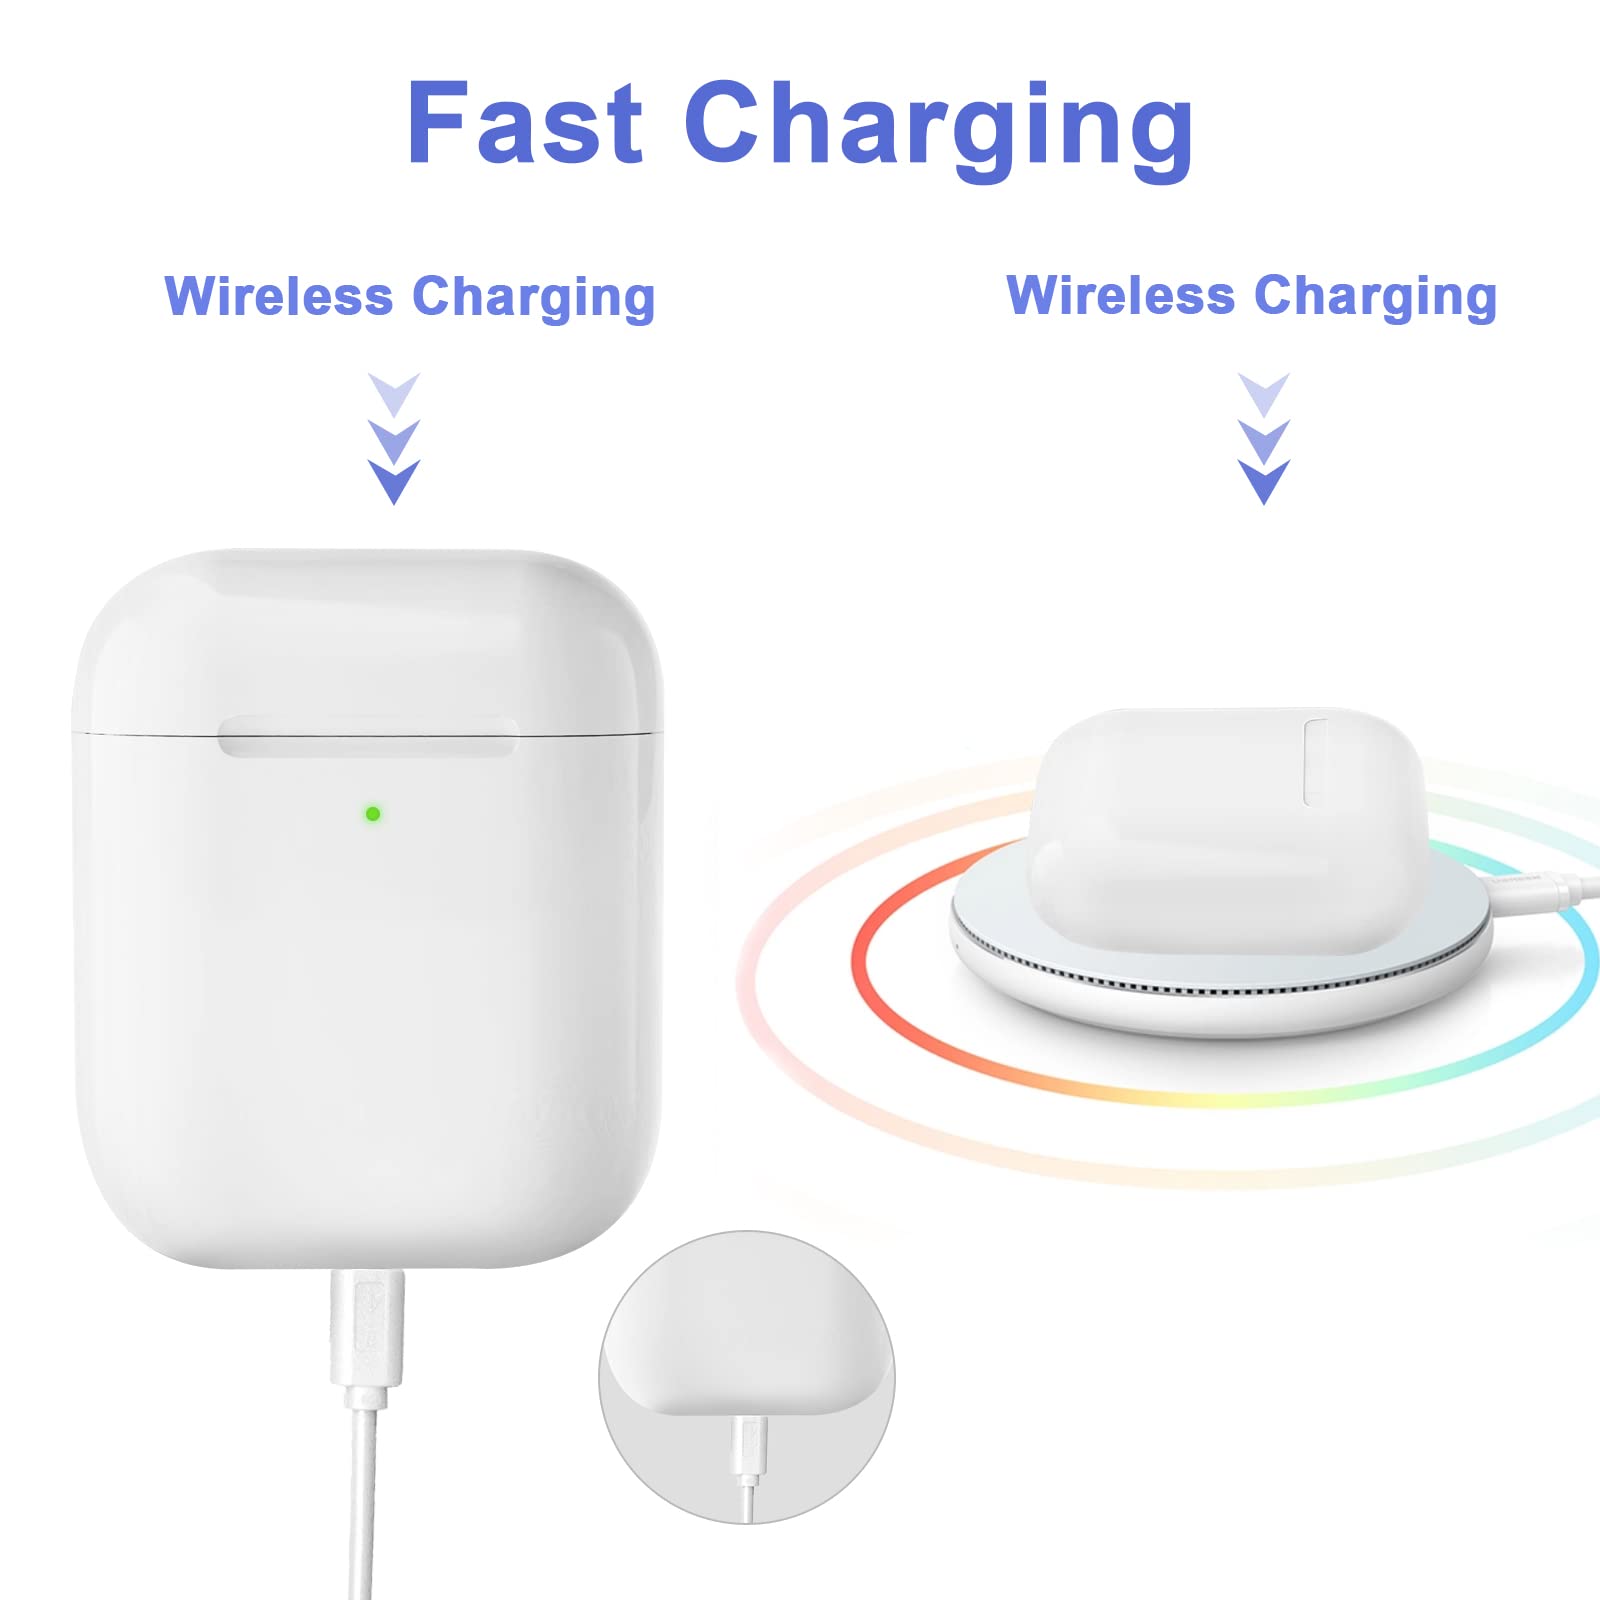 Wireless Charging Case for Air pod 1/2, Charger Case Replacement with Sync Button and Built-in 450 mAH Battery, No Earbuds Include